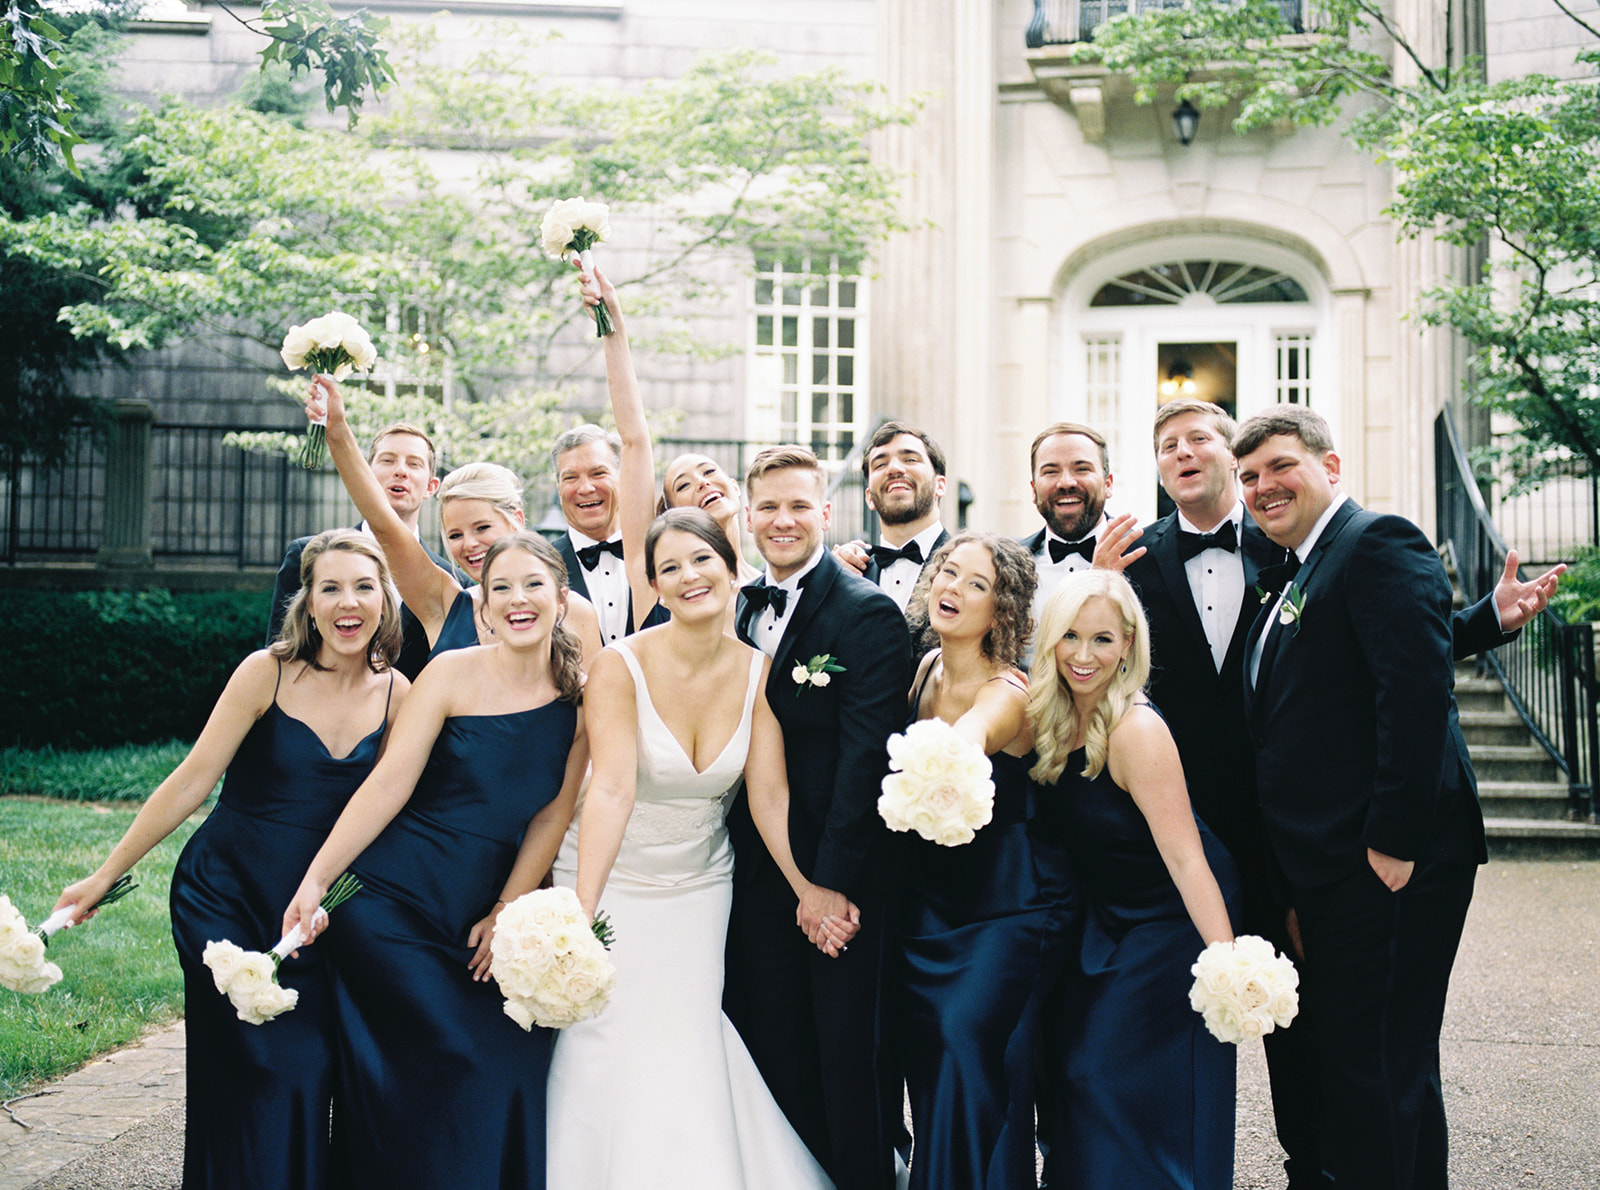 The wedding party poses excitedly for a photo in front of the mansion at Burritt on the Mountain